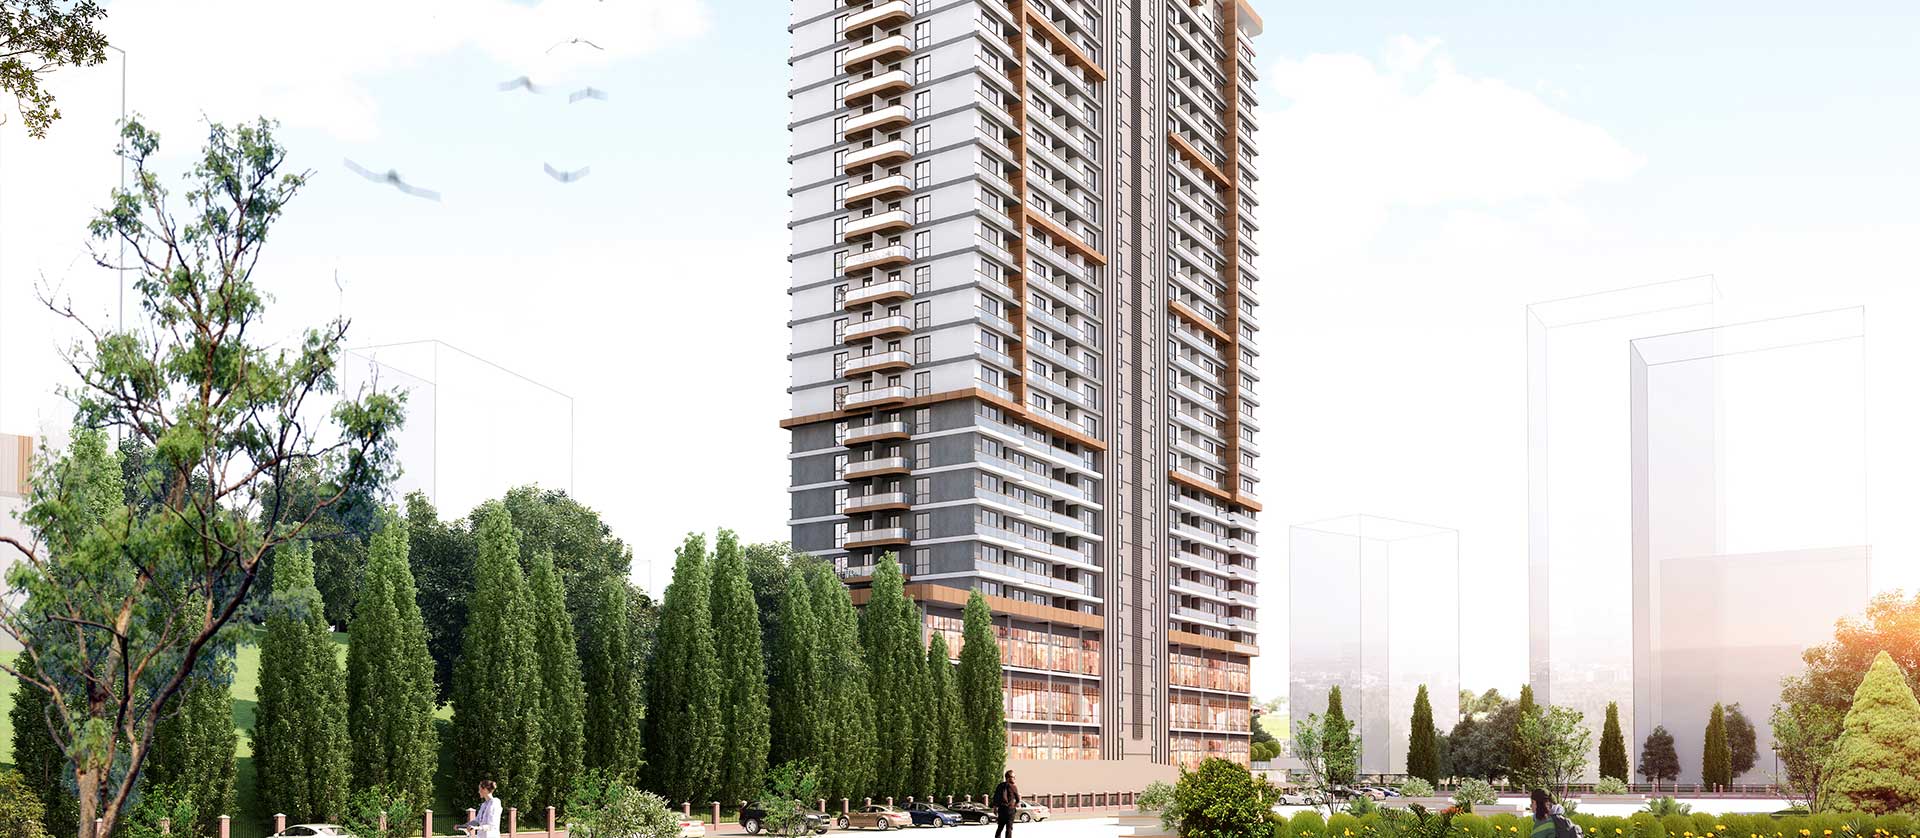 OLCAY POINT RESİDENCE